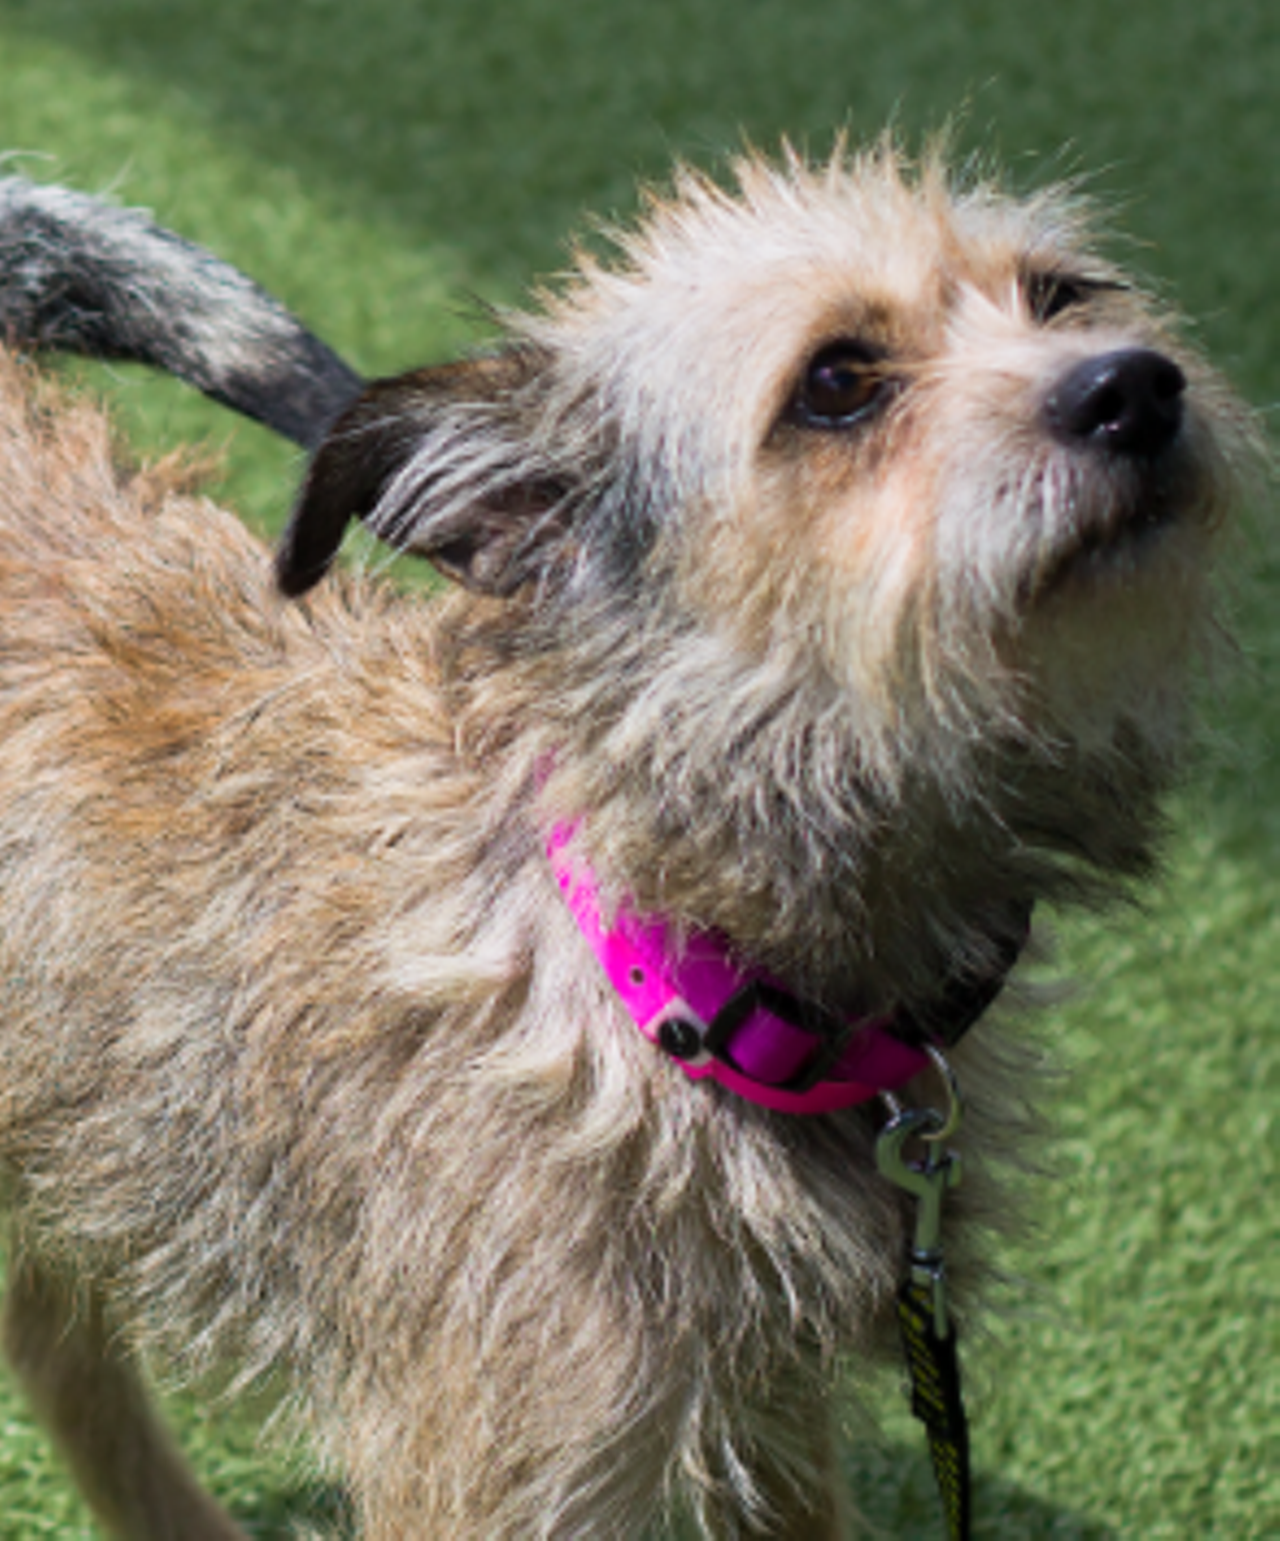 Scruffy
“Hi, I am Scruffy, I am a very super sweet girl who enjoys curling up on your lap and giving sweet kisses. I will provide you with all of my love and affection! Come down to meet me so we can get to know each other better! I’ll be waiting at the Paul Jolly Center.”